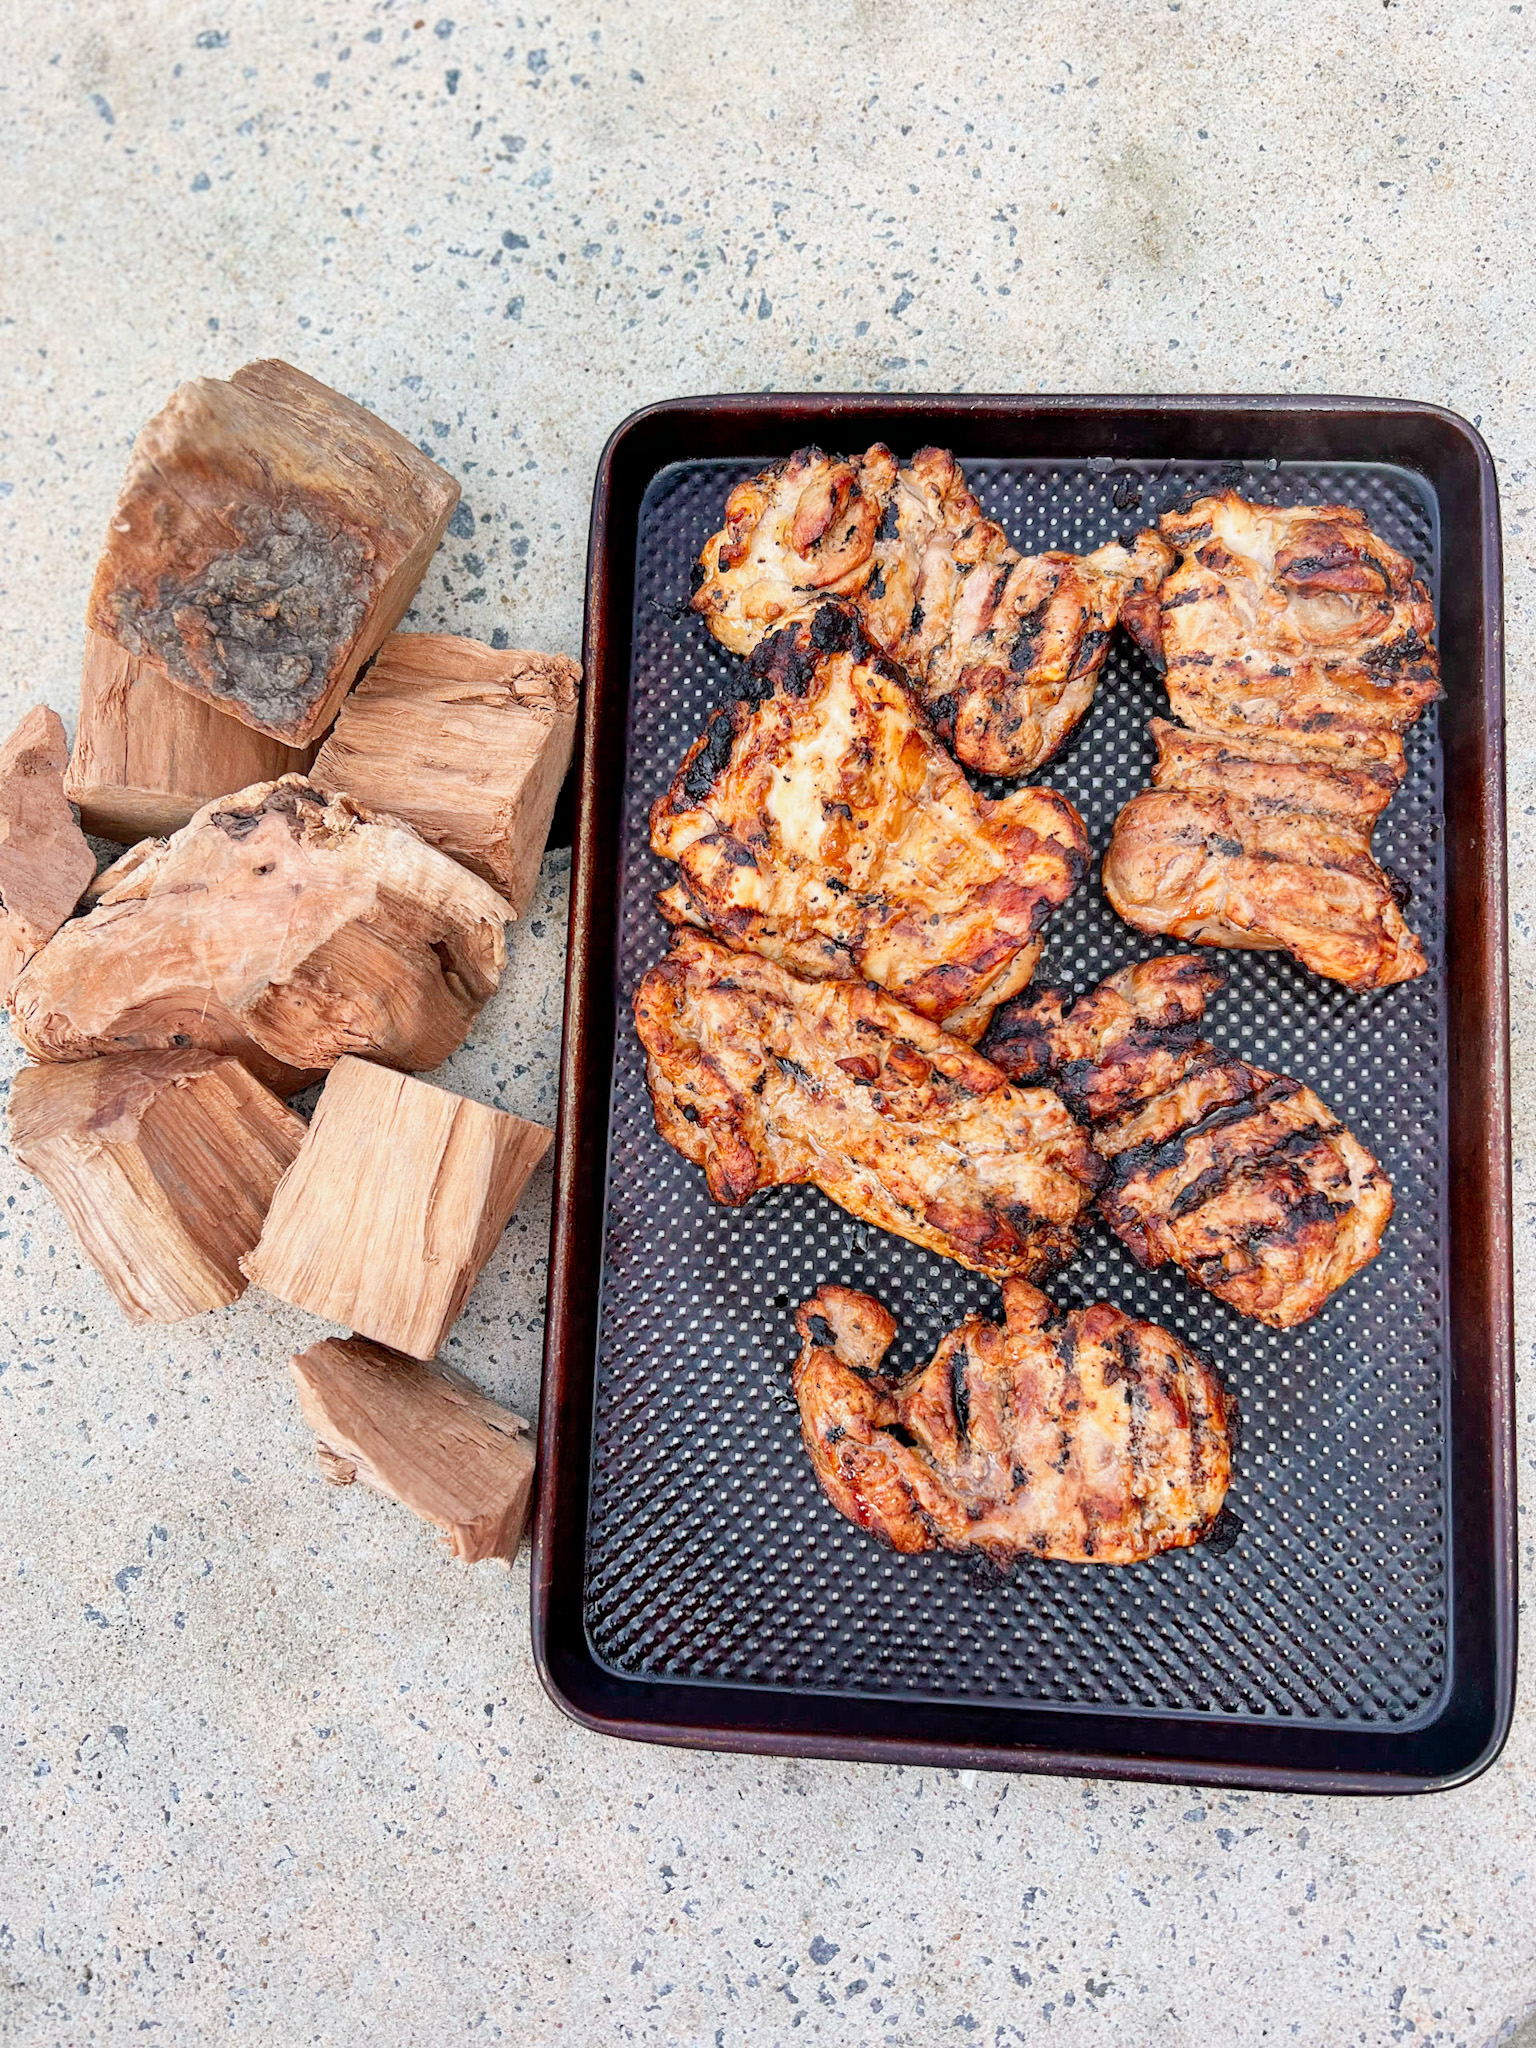 grilled chicken thighs on a tray with cherry wood chunks sitting next to them